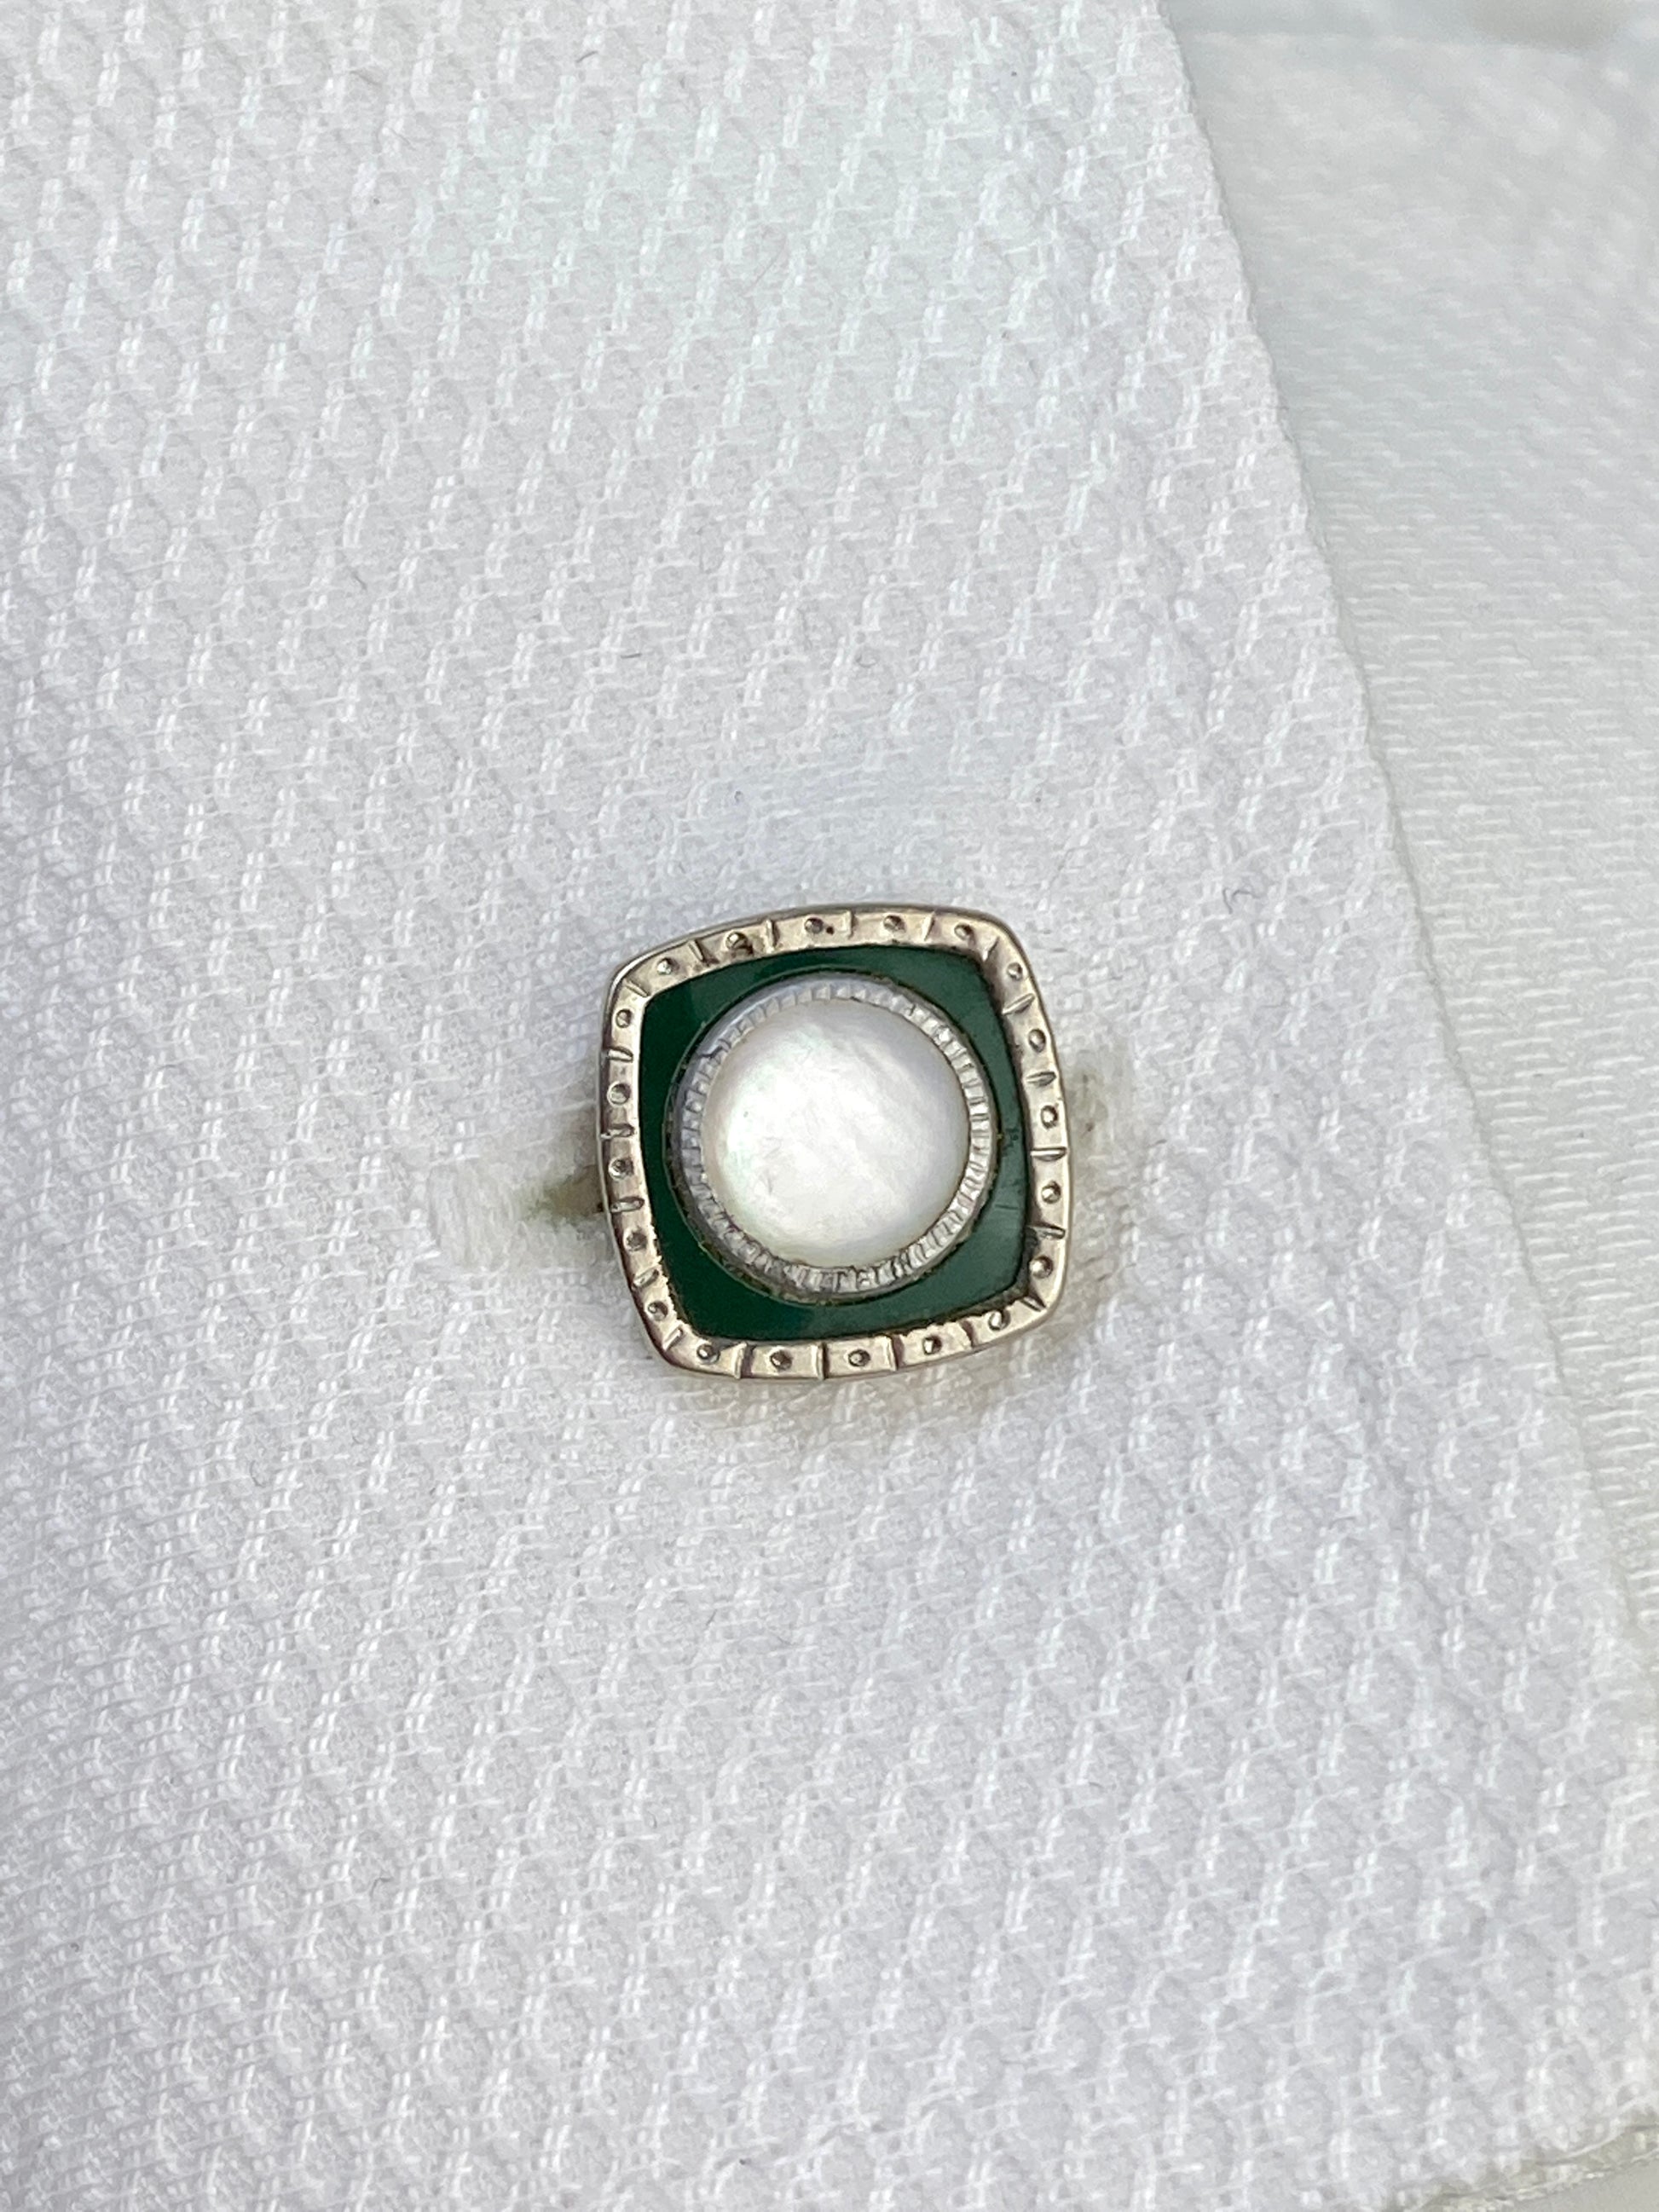 Vintage 1920s Art Deco Silver Square Cufflinks, Green Celluloid & Mother of Pearl, Snap Link